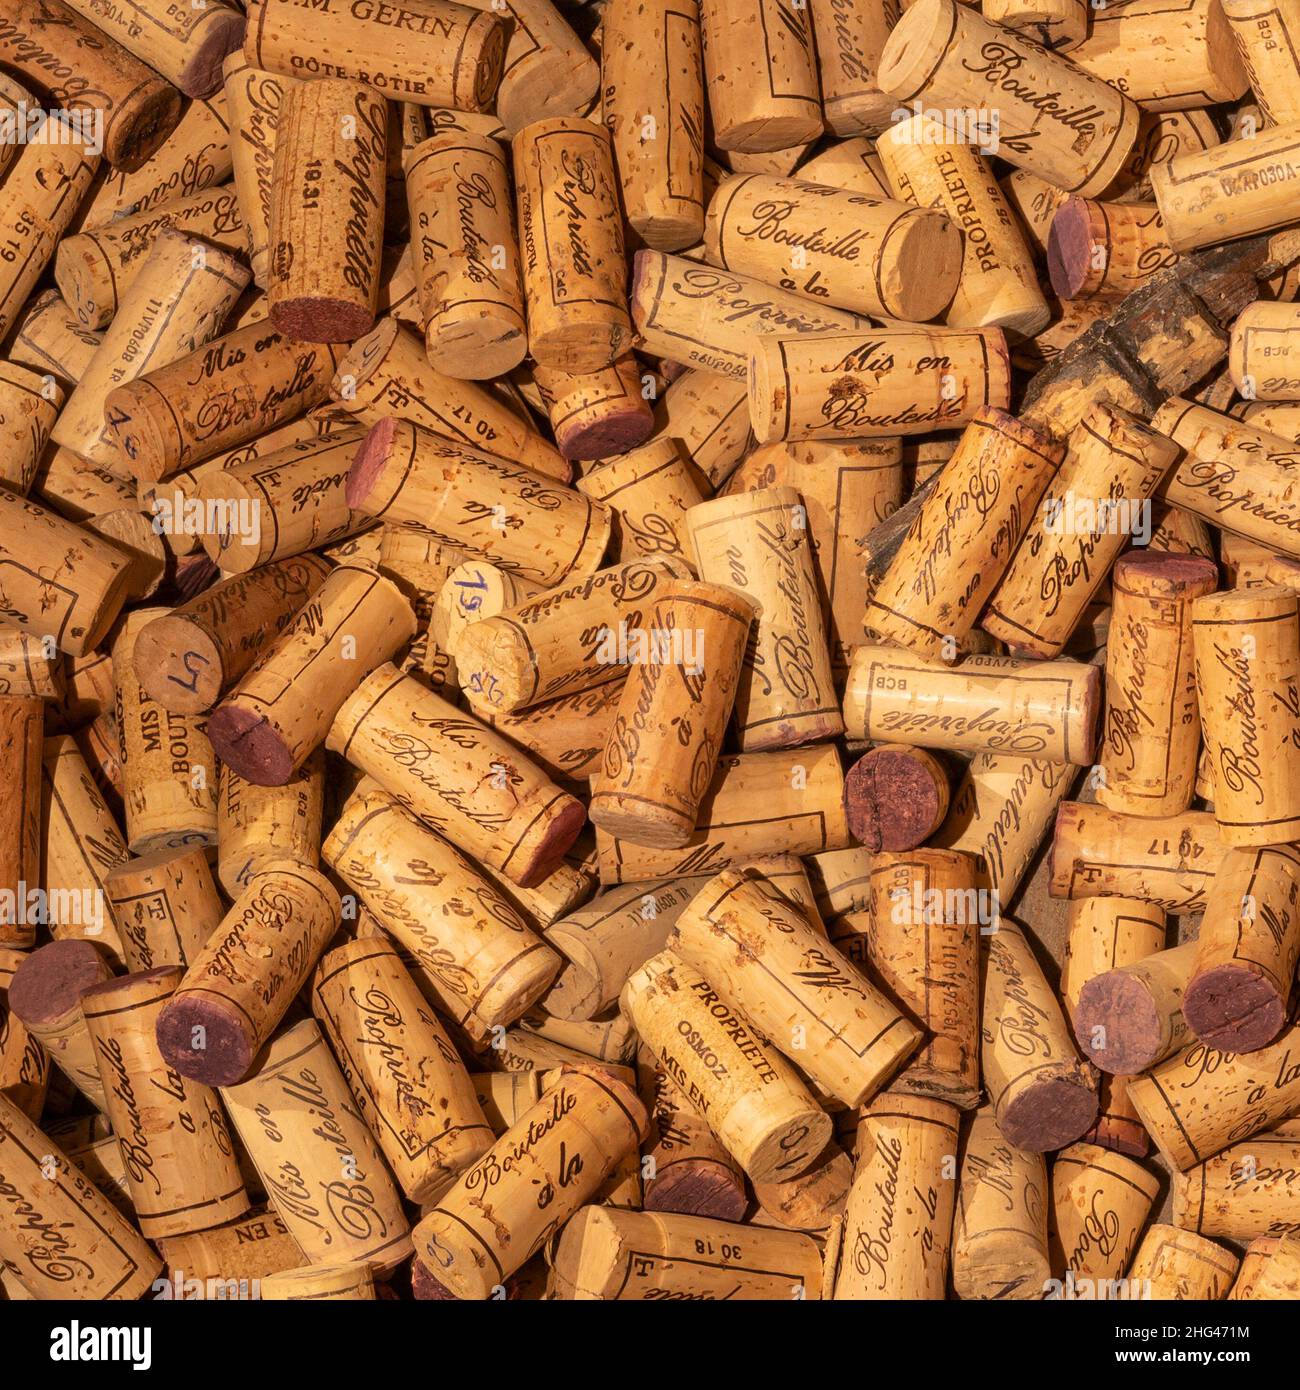 Monthelie, France - June 30, 2020: Corks in a barrel at domaine Boussy, Monthalie, burgundy, France. Stock Photo